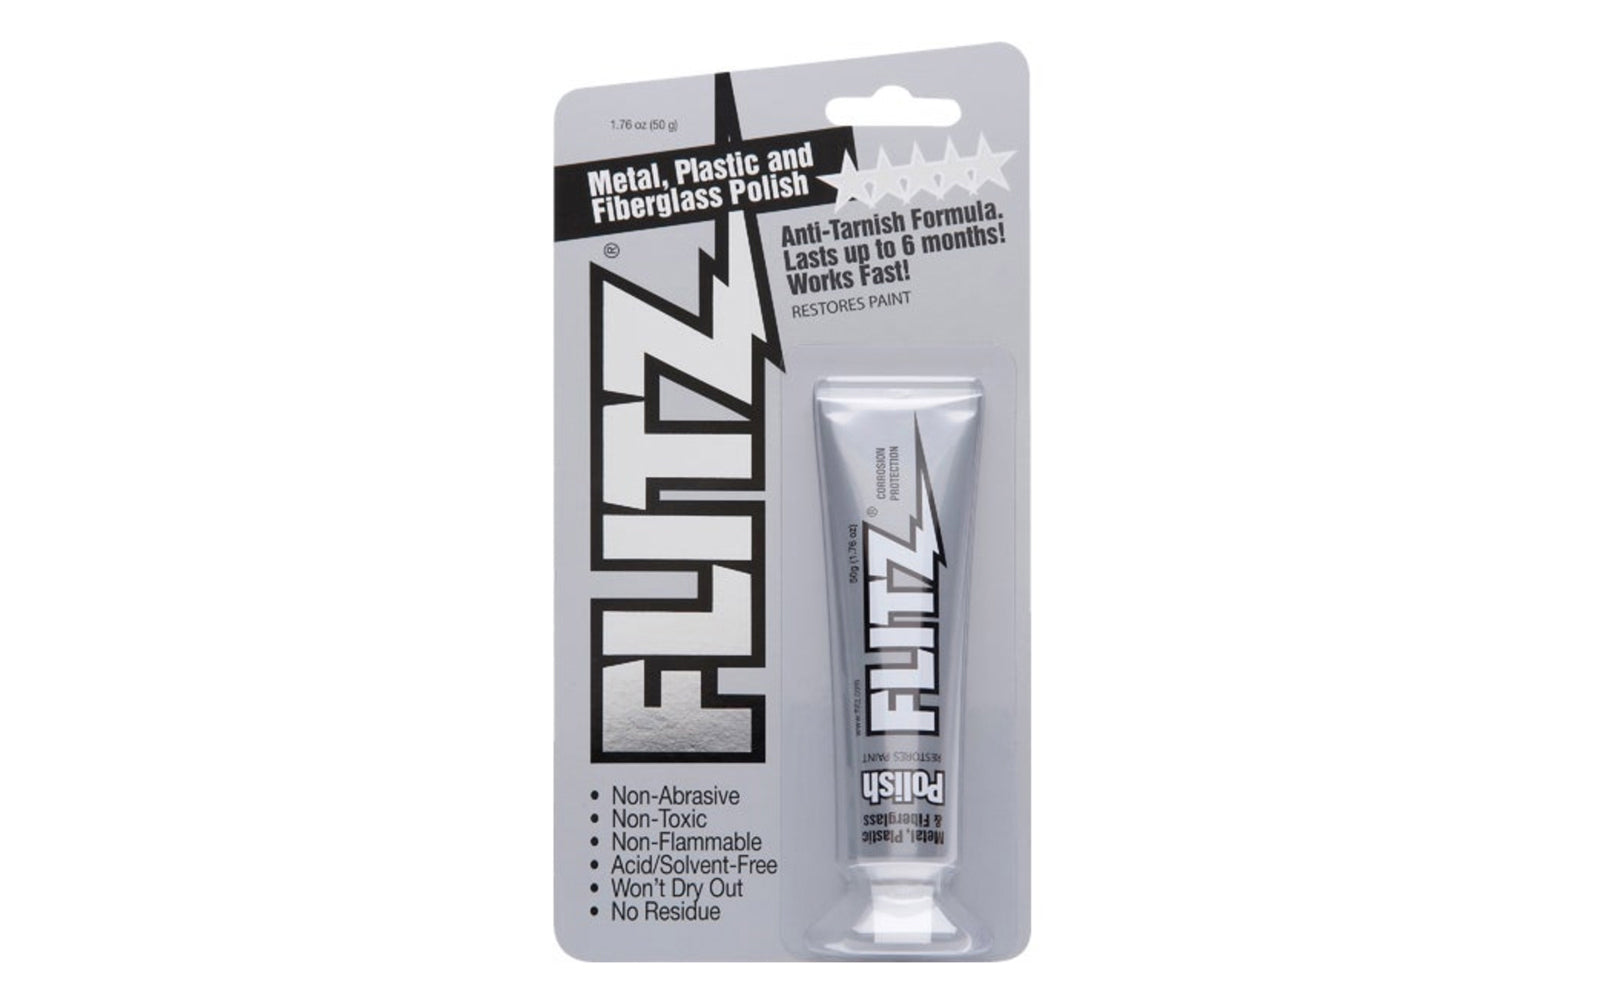 Flitz Paste Polish - 1.76 oz. A double strength blueing solution for polished steel parts & hardened steels. For use on Brass, copper, silverplate, sterling silver, chrome, stainless steel, nickel, bronze, solid gold, aluminum, anodized aluminum, beryllium, magnesium, platinum, pewter. Made in USA.